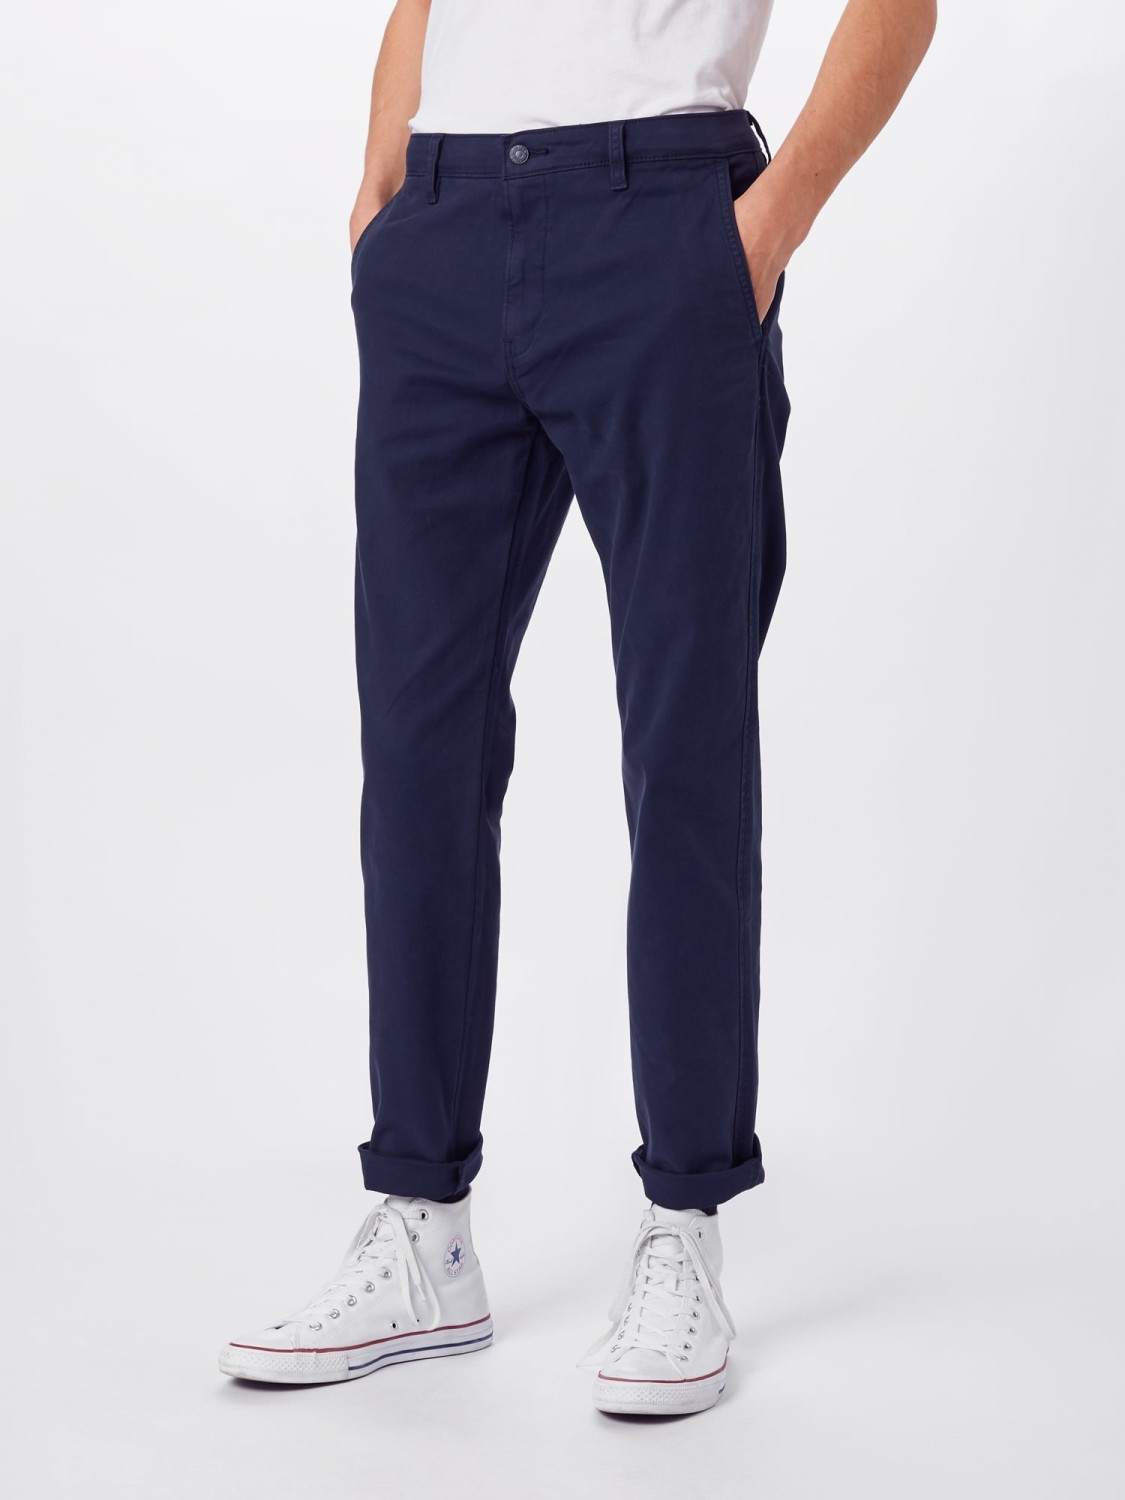 Buy Levi's XX Chino Standard Taper baltic navy from £44.99 (Today ...